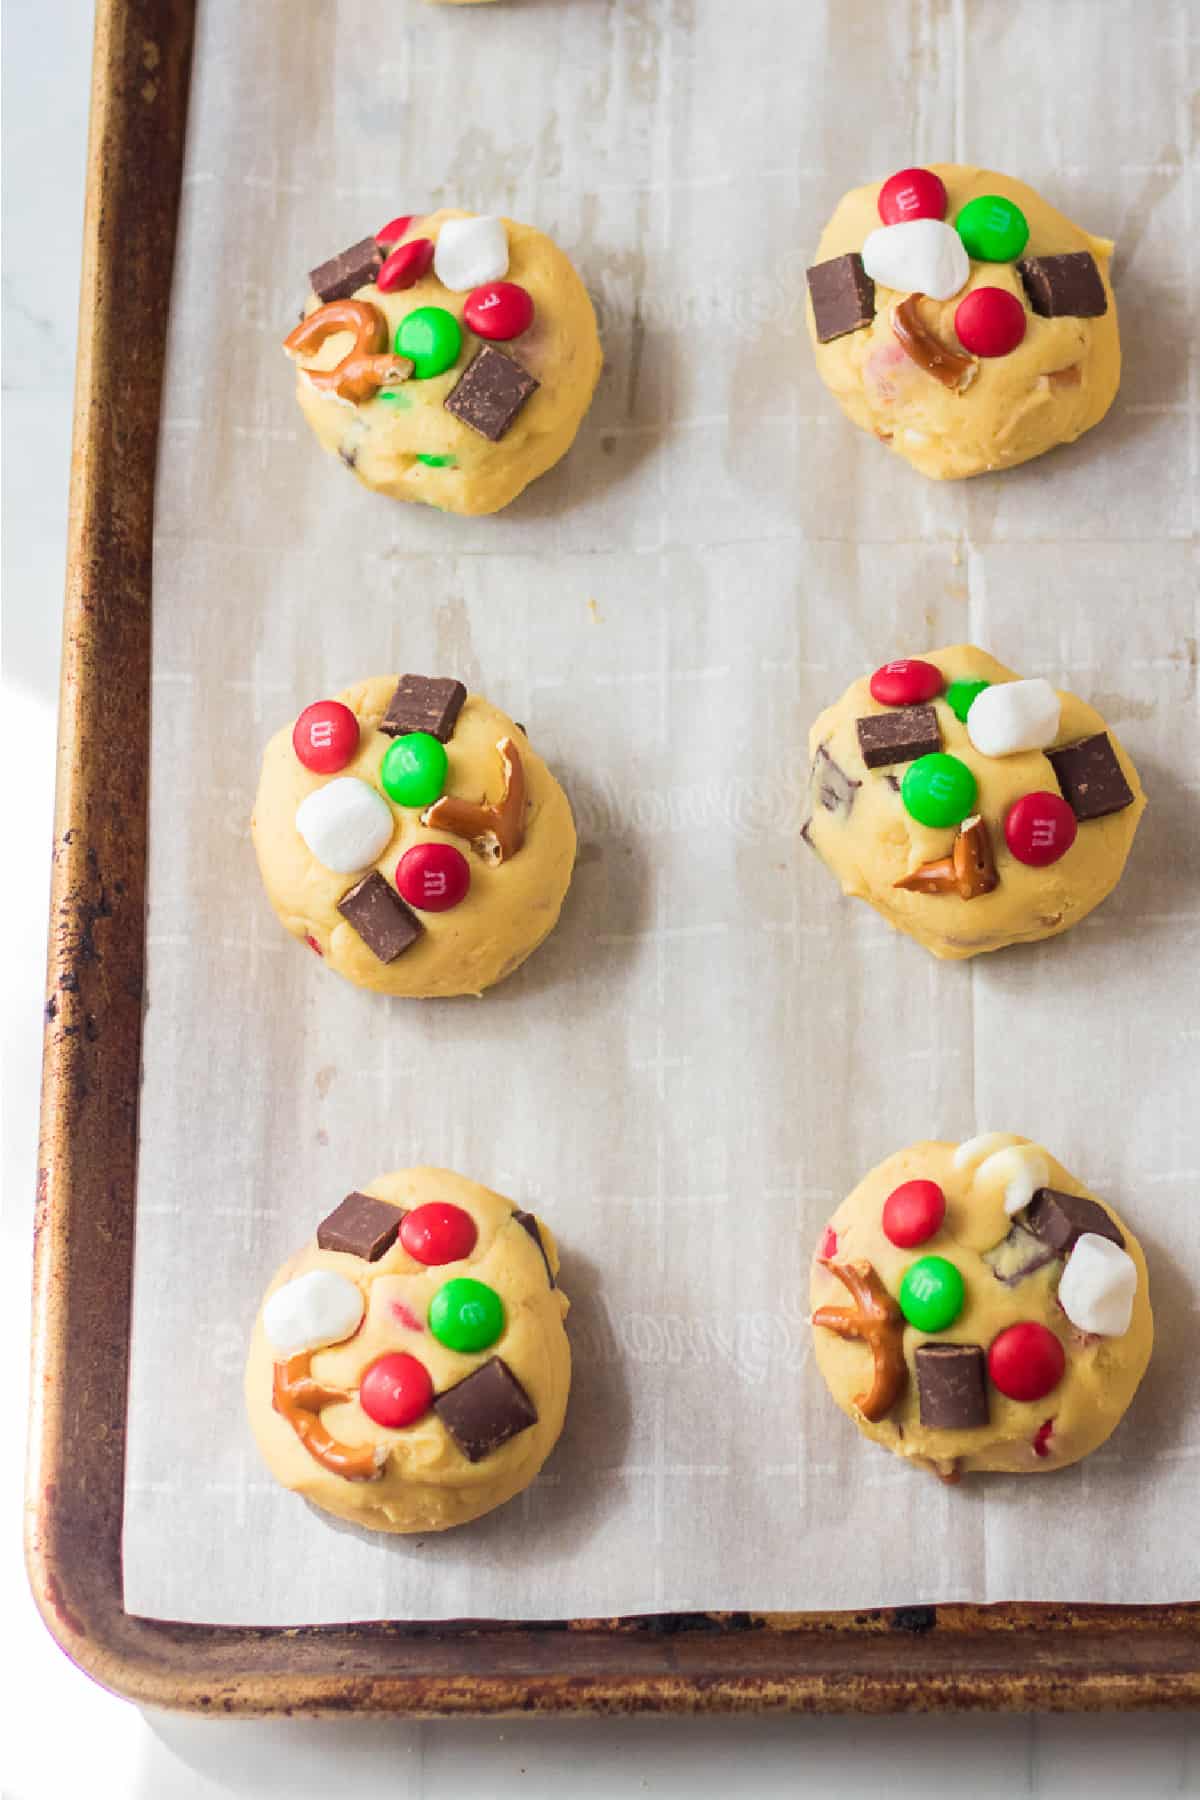 Baking sheet with cookie dough balls covered in chocolate chunks, red and green M&Ms, marshmallows and pretzels pieces.